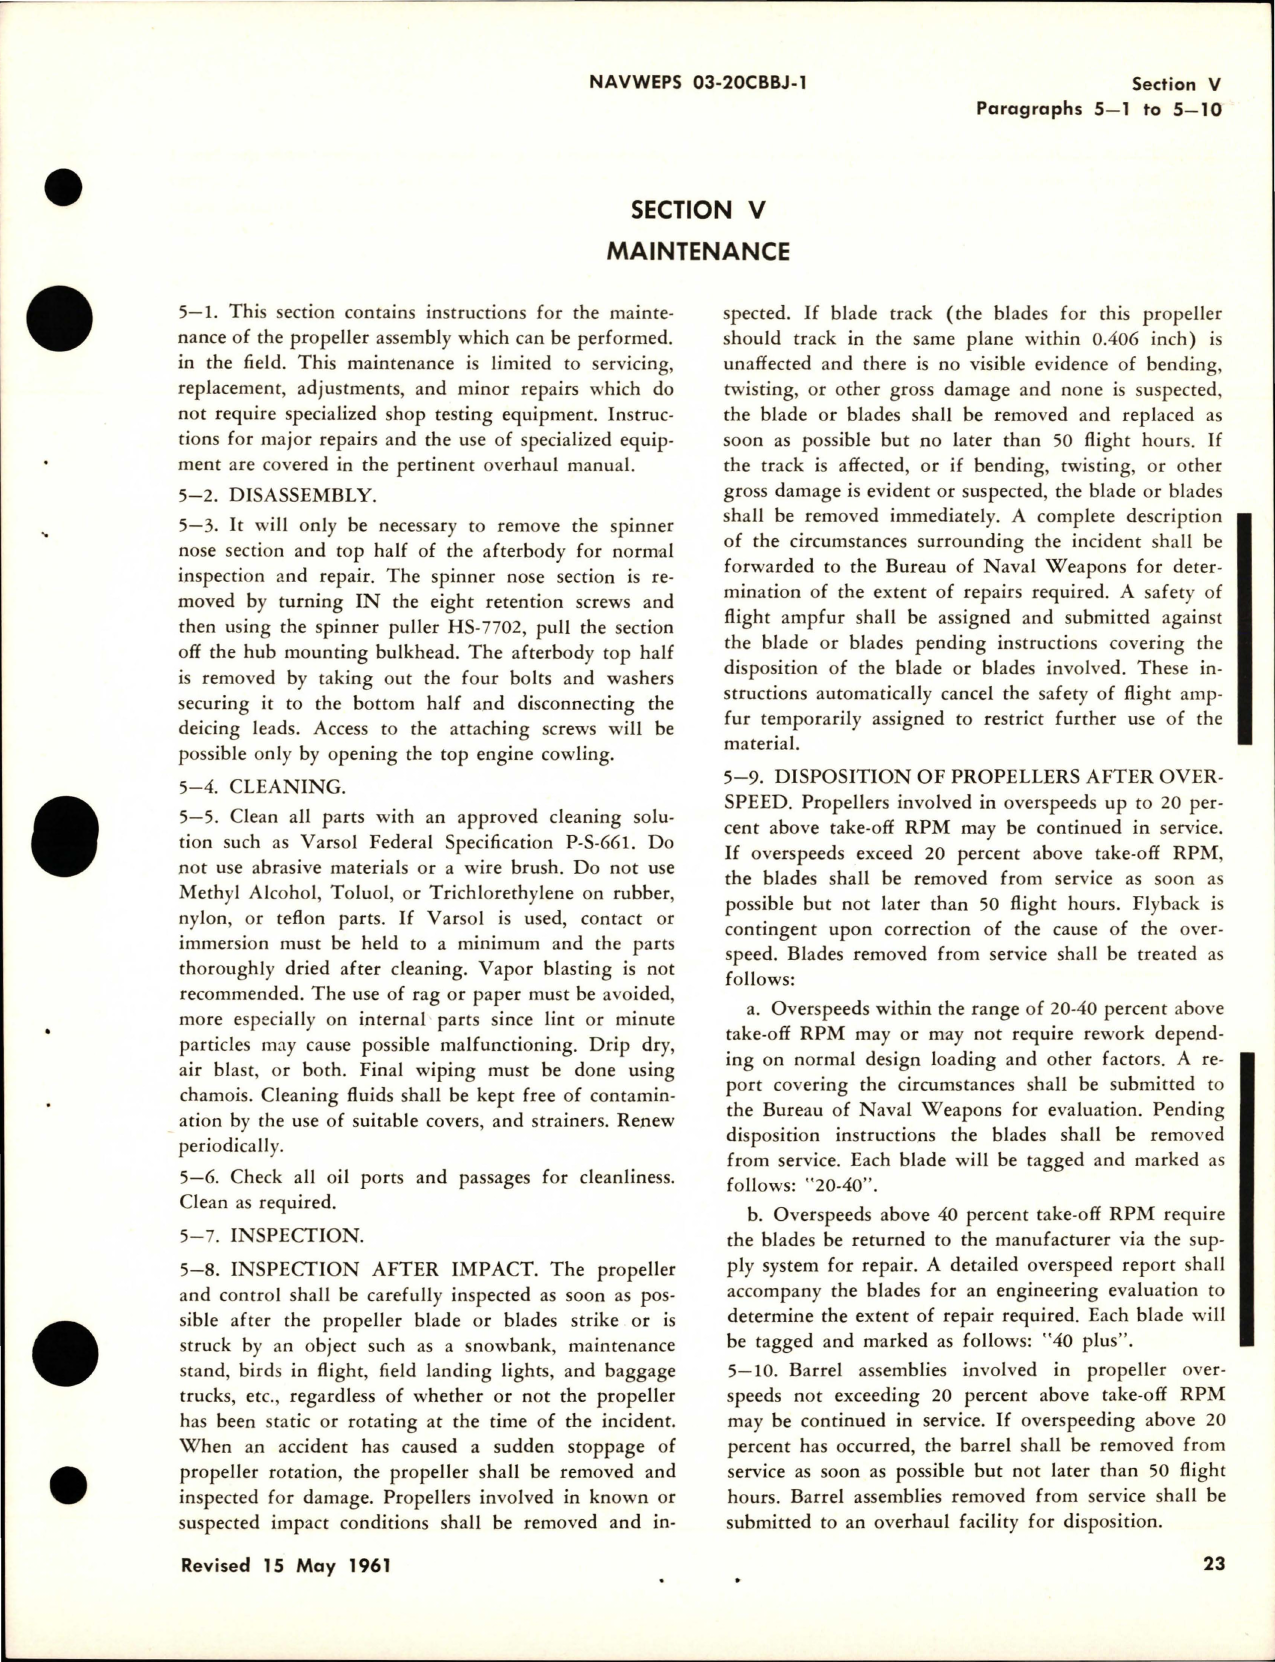 Sample page 7 from AirCorps Library document: Operation and Maintenance Instructions for Variable Pitch Propeller - Models 54H60-69, 54H60-75, and 54H60-73